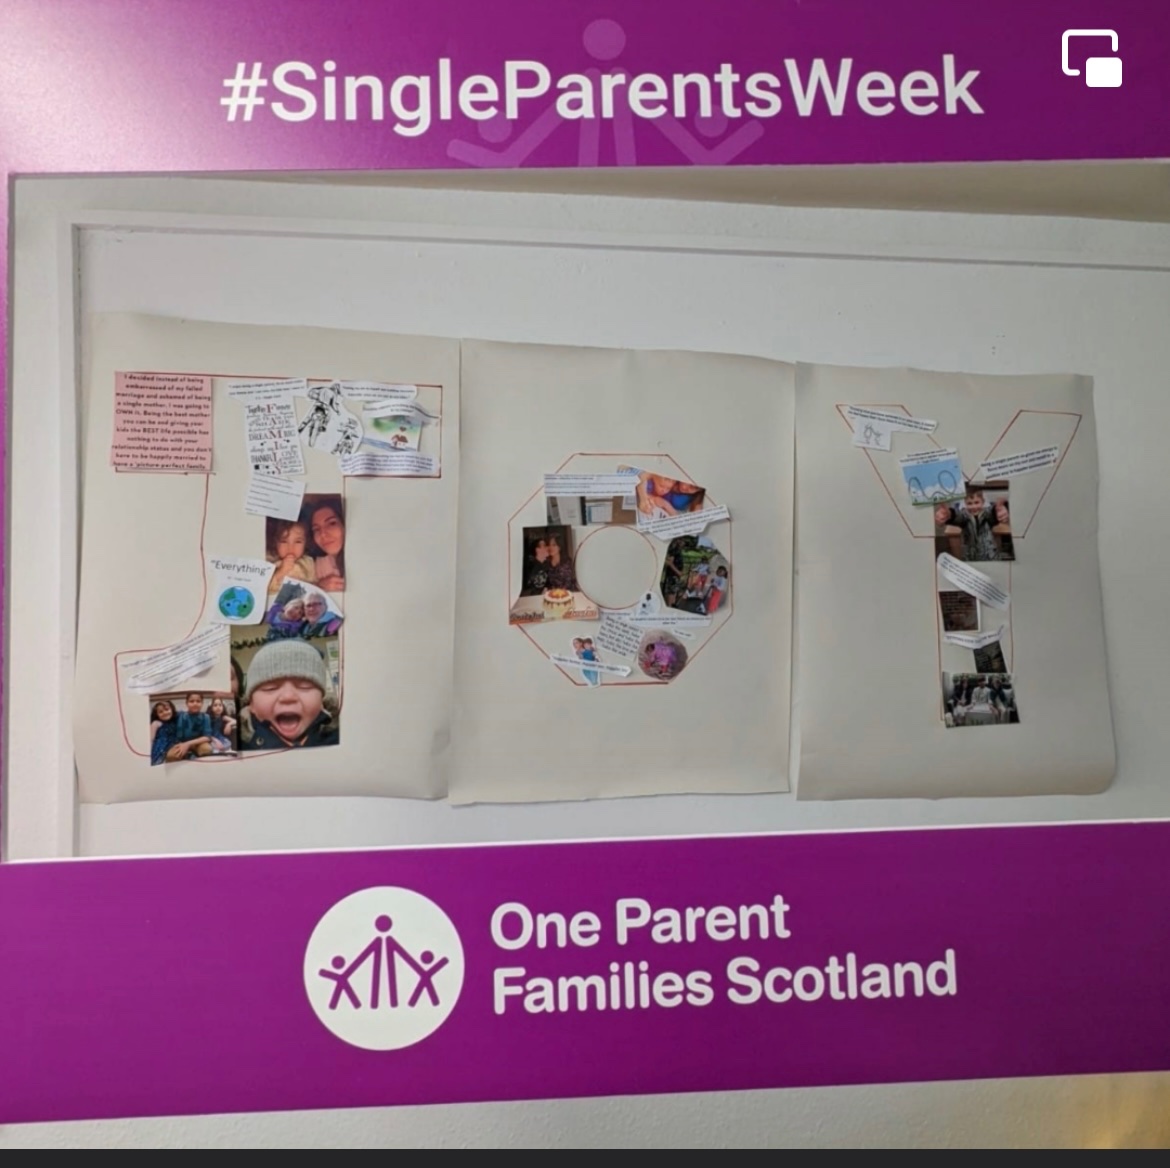 #singleparentday #StandWithSingleParents #SingleParentJoy 

Such a fantastic day celebrating 🥳 single parent day @OPFS Dundee - parents joined us for activities and cake 🍰. So blessed Dundee parents sharing their joy and experiences with us 🤩